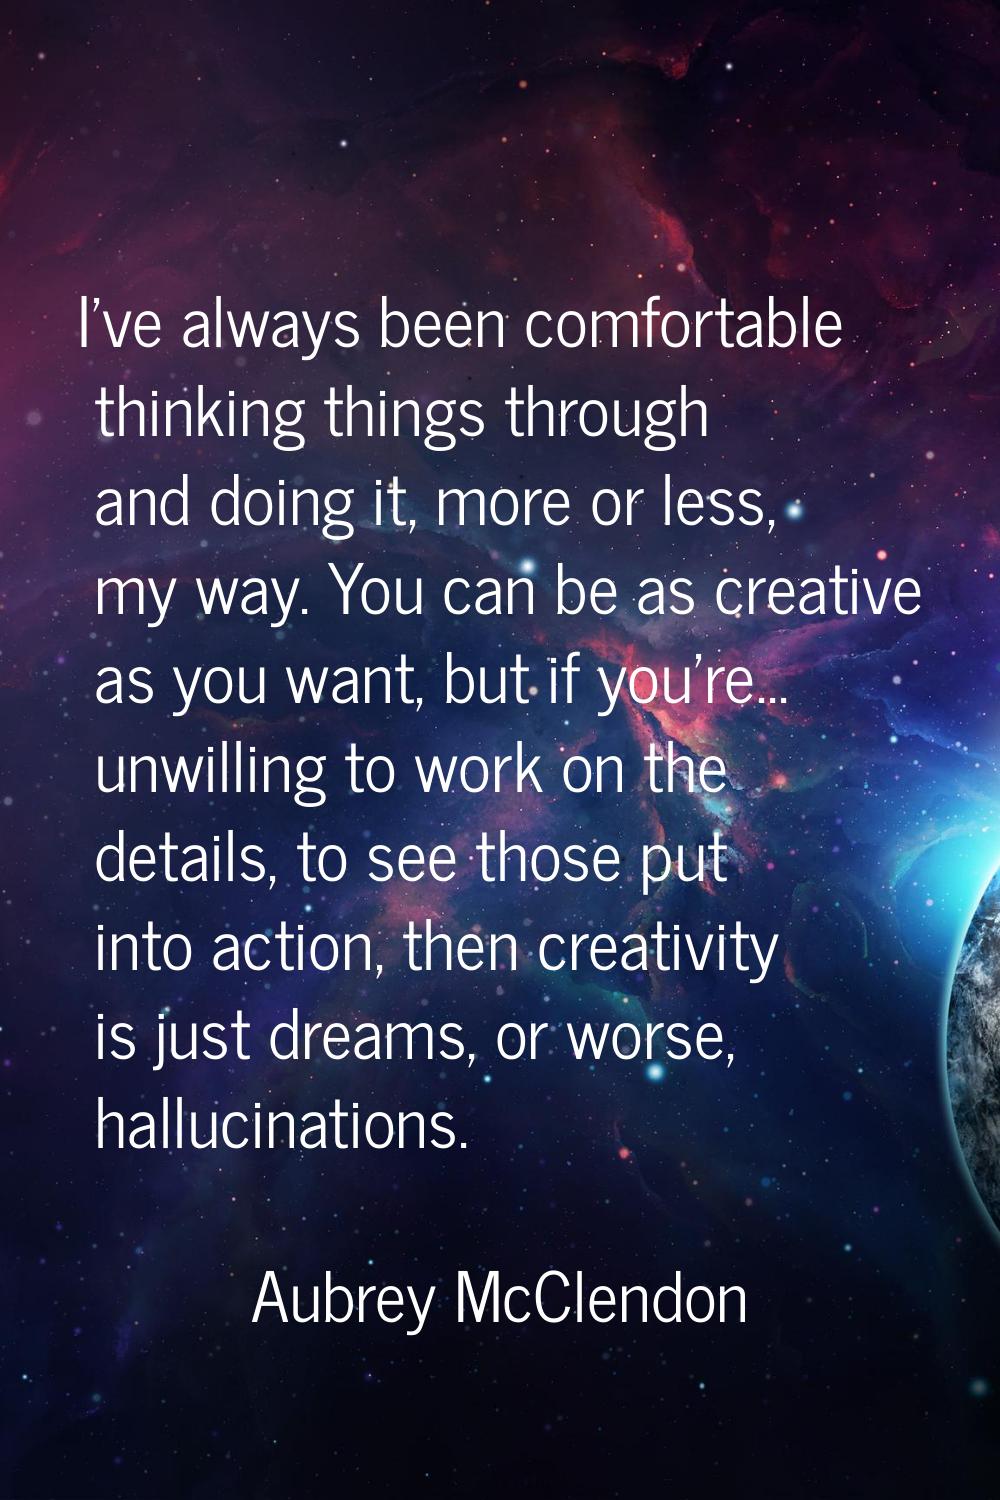 I've always been comfortable thinking things through and doing it, more or less, my way. You can be